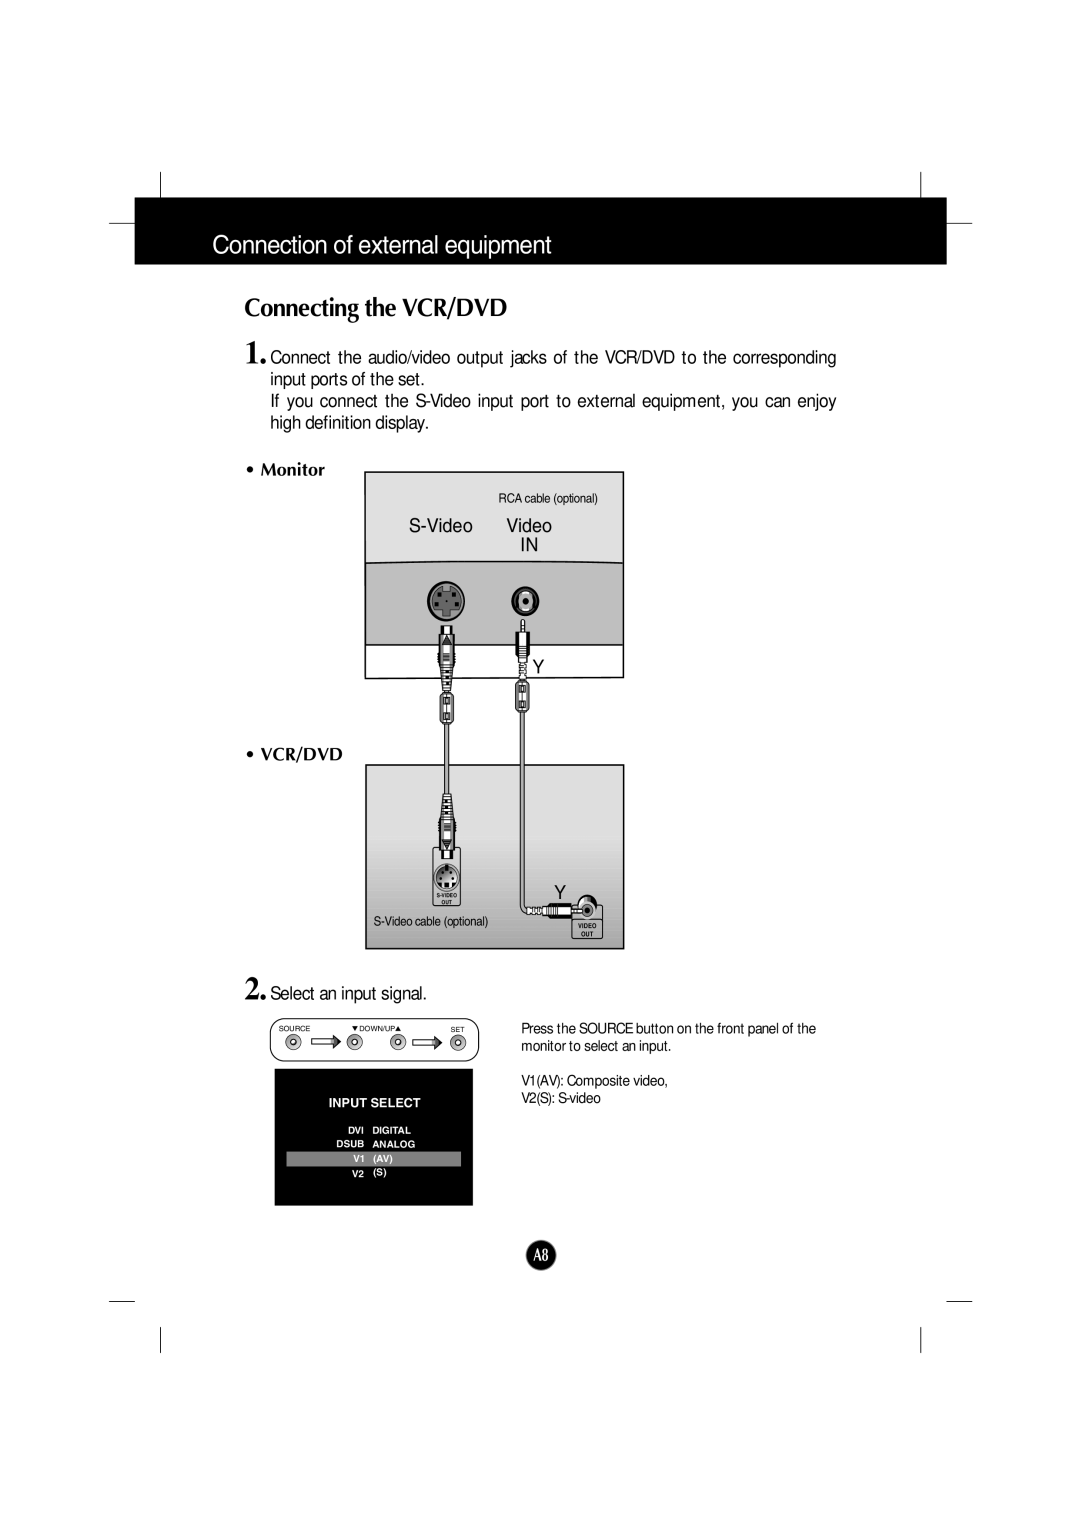 Gateway FPD2200 manual Connection of external equipment, Connecting the VCR/DVD, S-Video Video IN, Monitor, Vcr/Dvd 